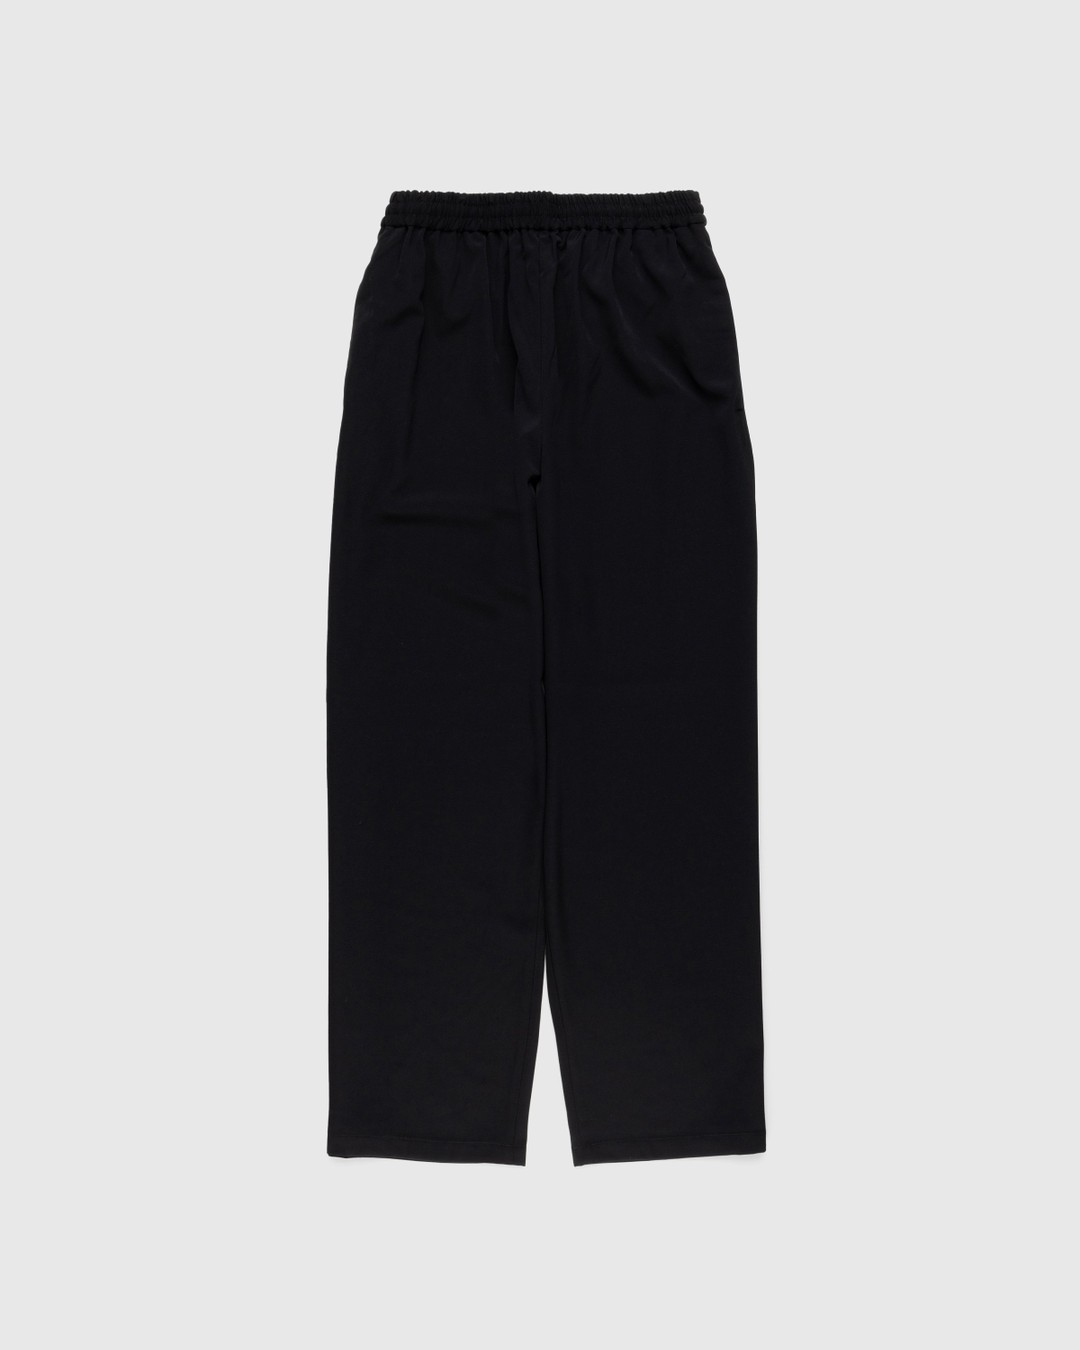 Acne Studios – Relaxed Fit Trousers Black - Pants - Black - Image 1